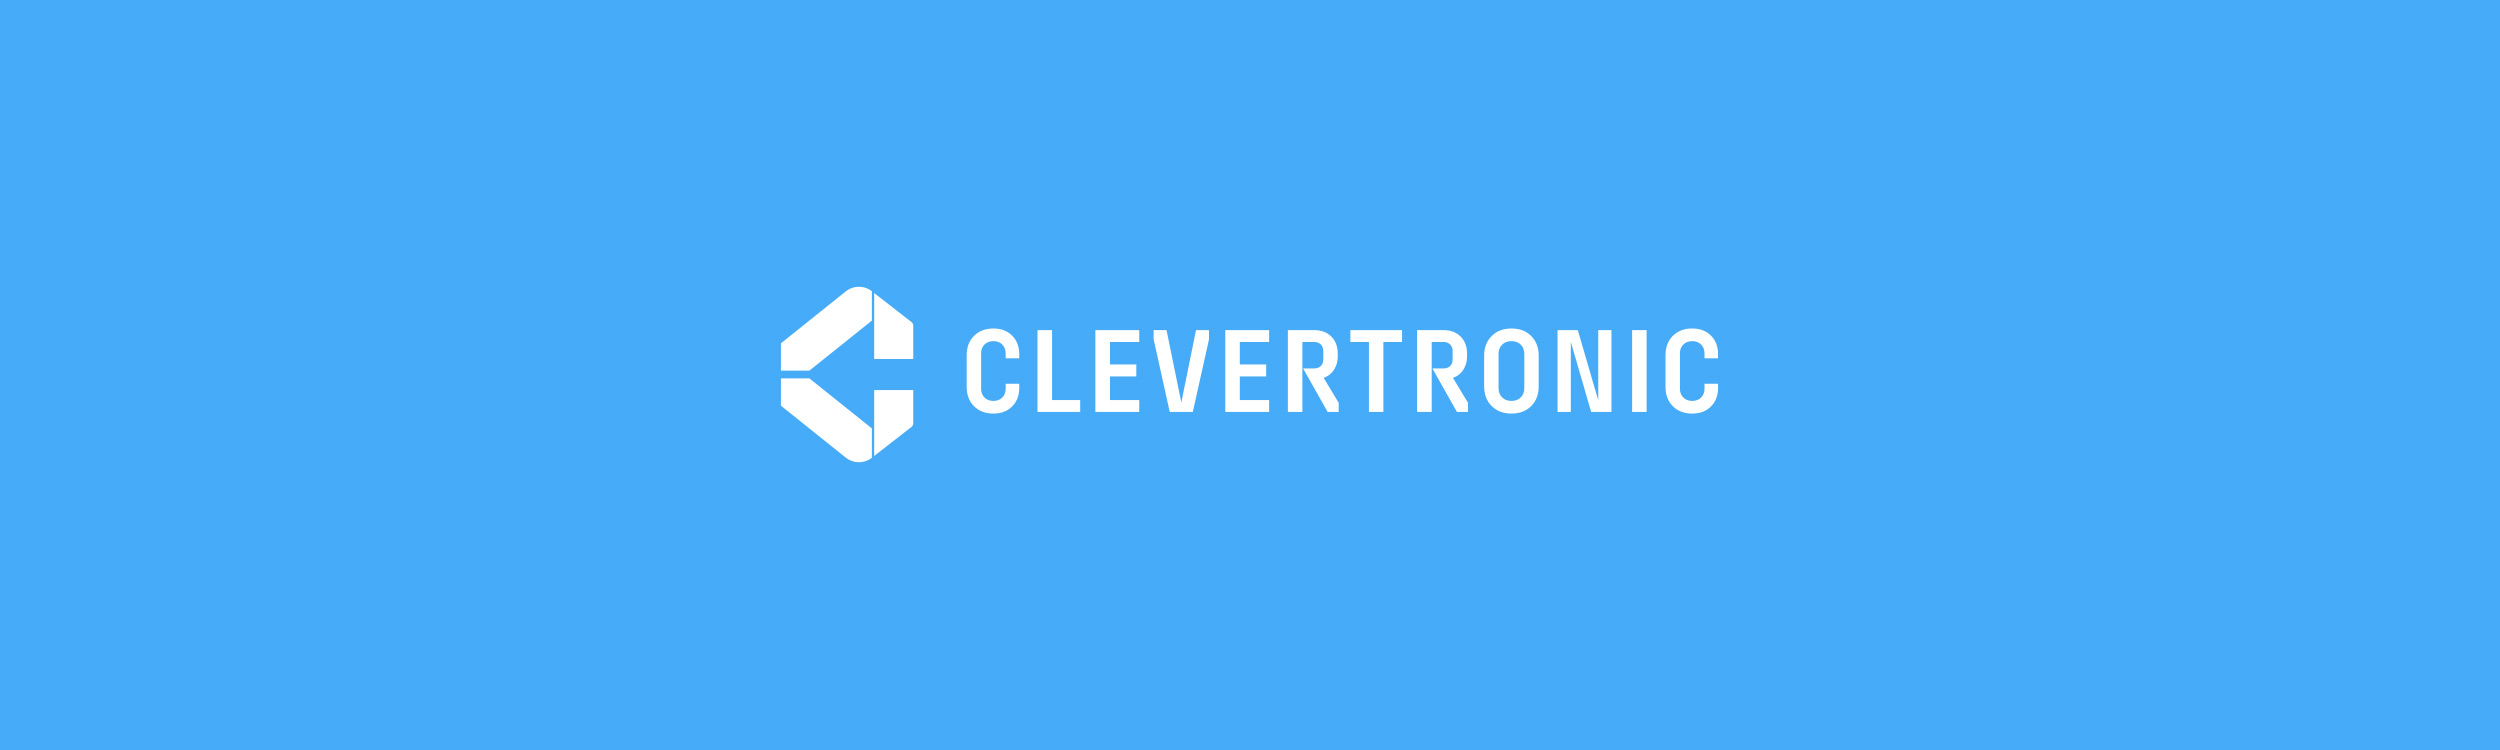 2021-flo-clevertronic-2500×750-1